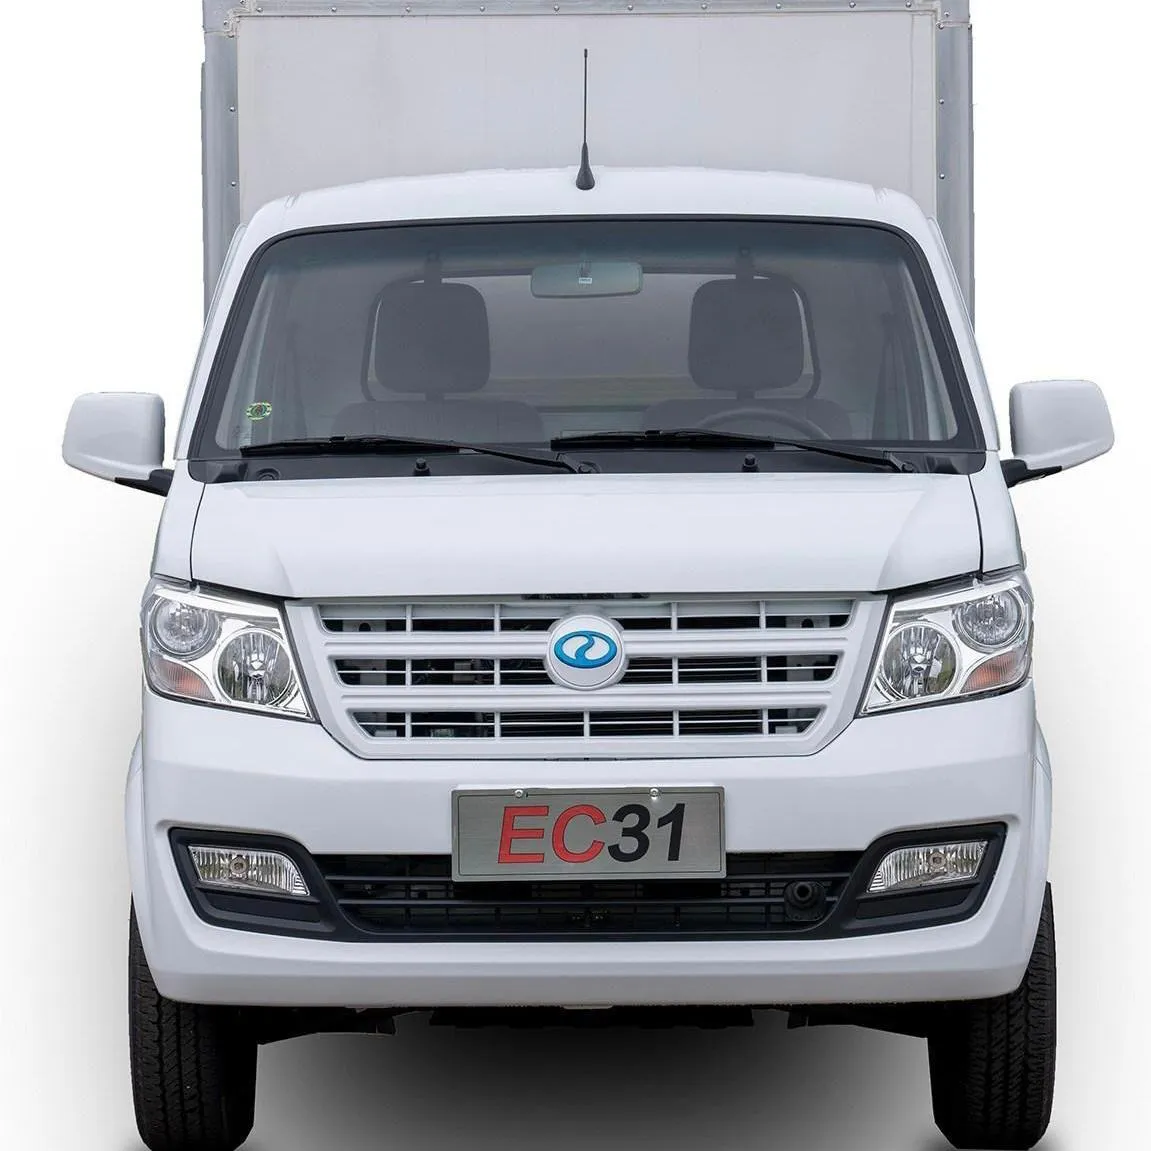 Chinese Brand Dongfeng Rich EC 31 Auto EV pICKUP Truck Cargo With Double Cab Truck electric van For Sale